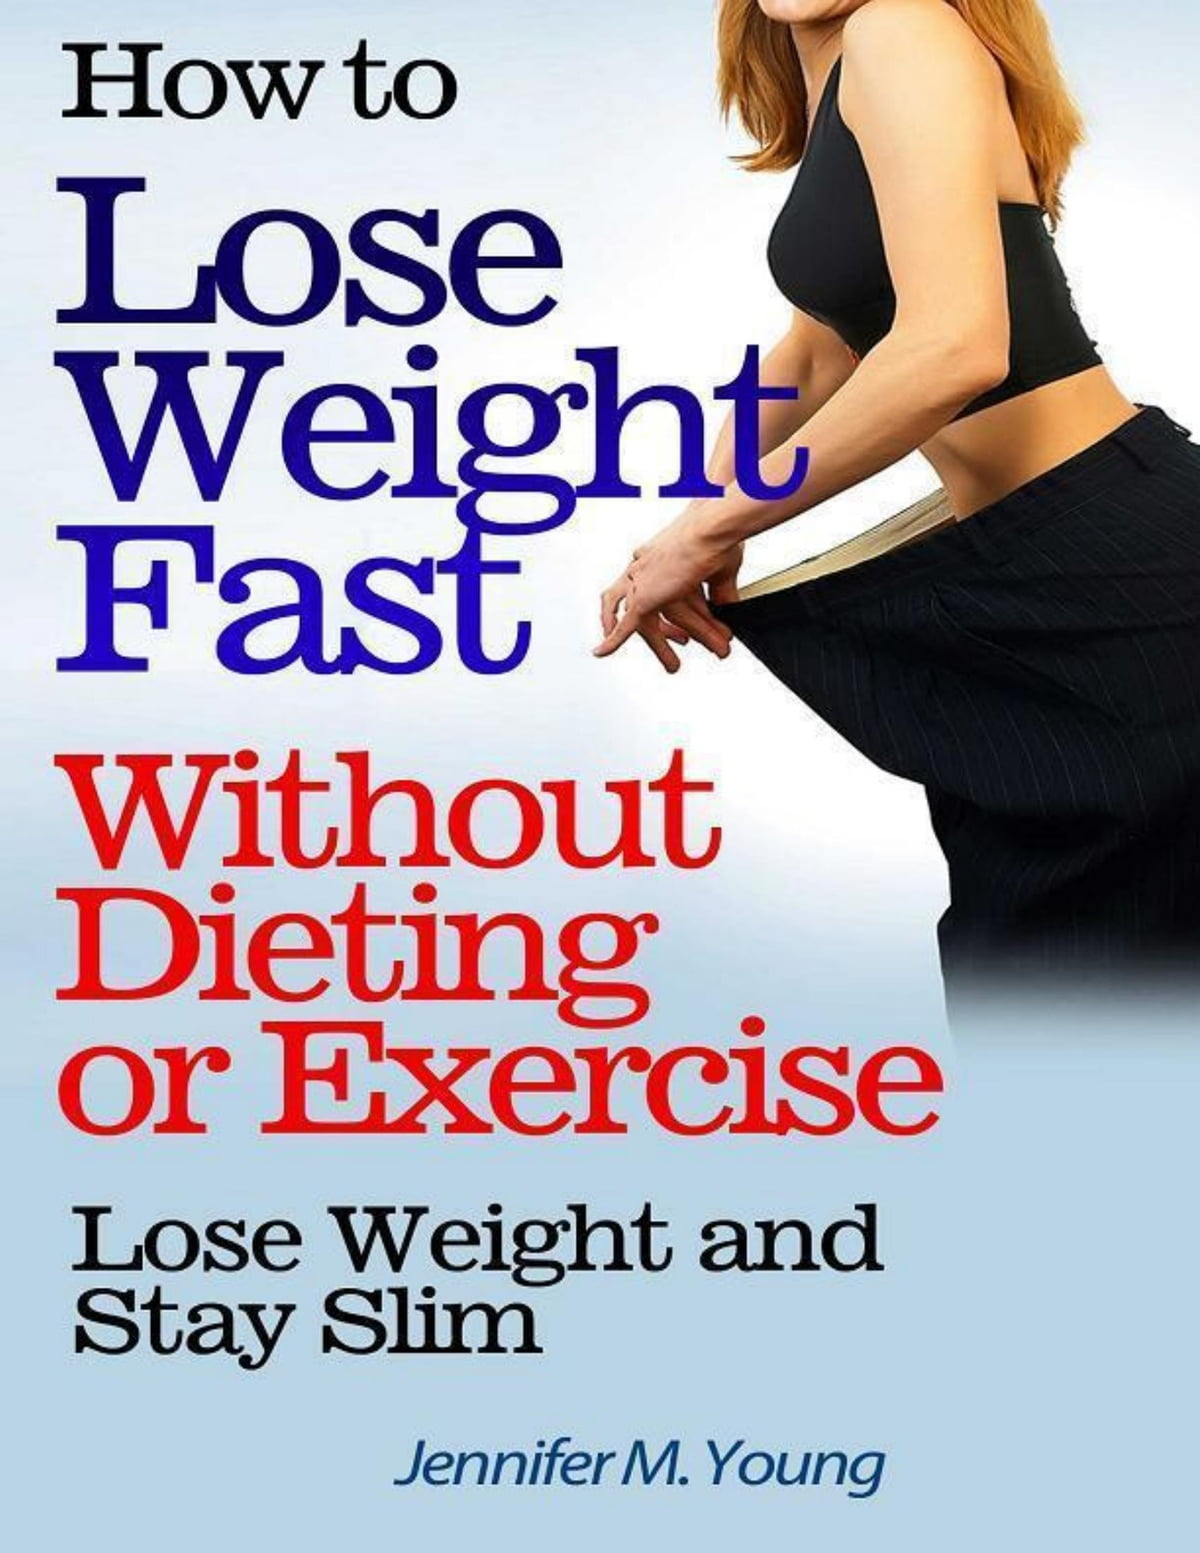 How To Lose Weight Fast Without Exercise Diet Plan | PrintableDietPlan.com